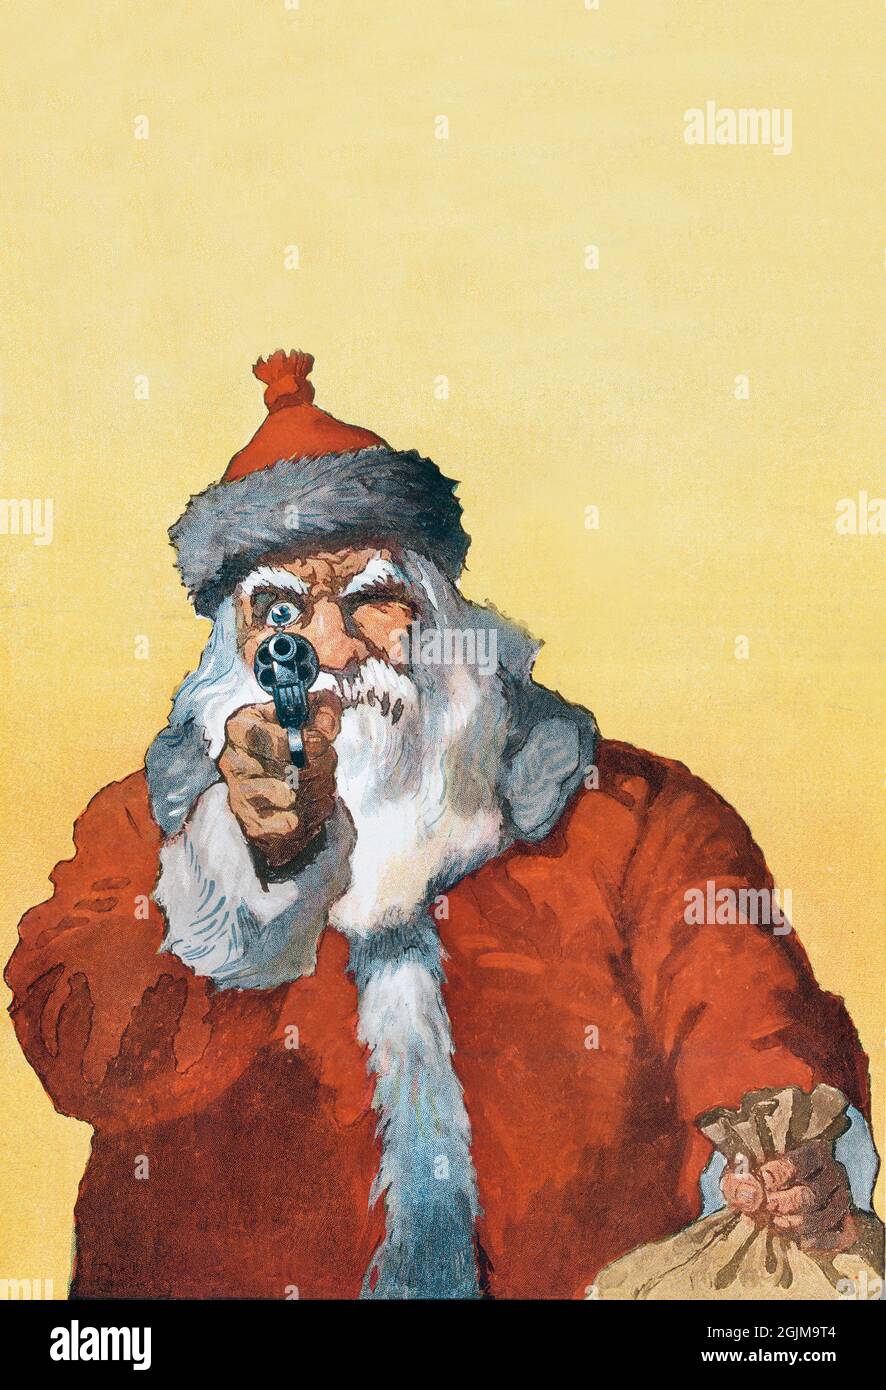 Santa Claus, 'Hands Up!' Puck Christmas, 1912. 'Hands up!' photomechanical print showing a Santa Claus pointing a handgun at the viewer (1912) by Will Crawford.  A unique, optimised and enhanced version of an historical illustration. Stock Photo